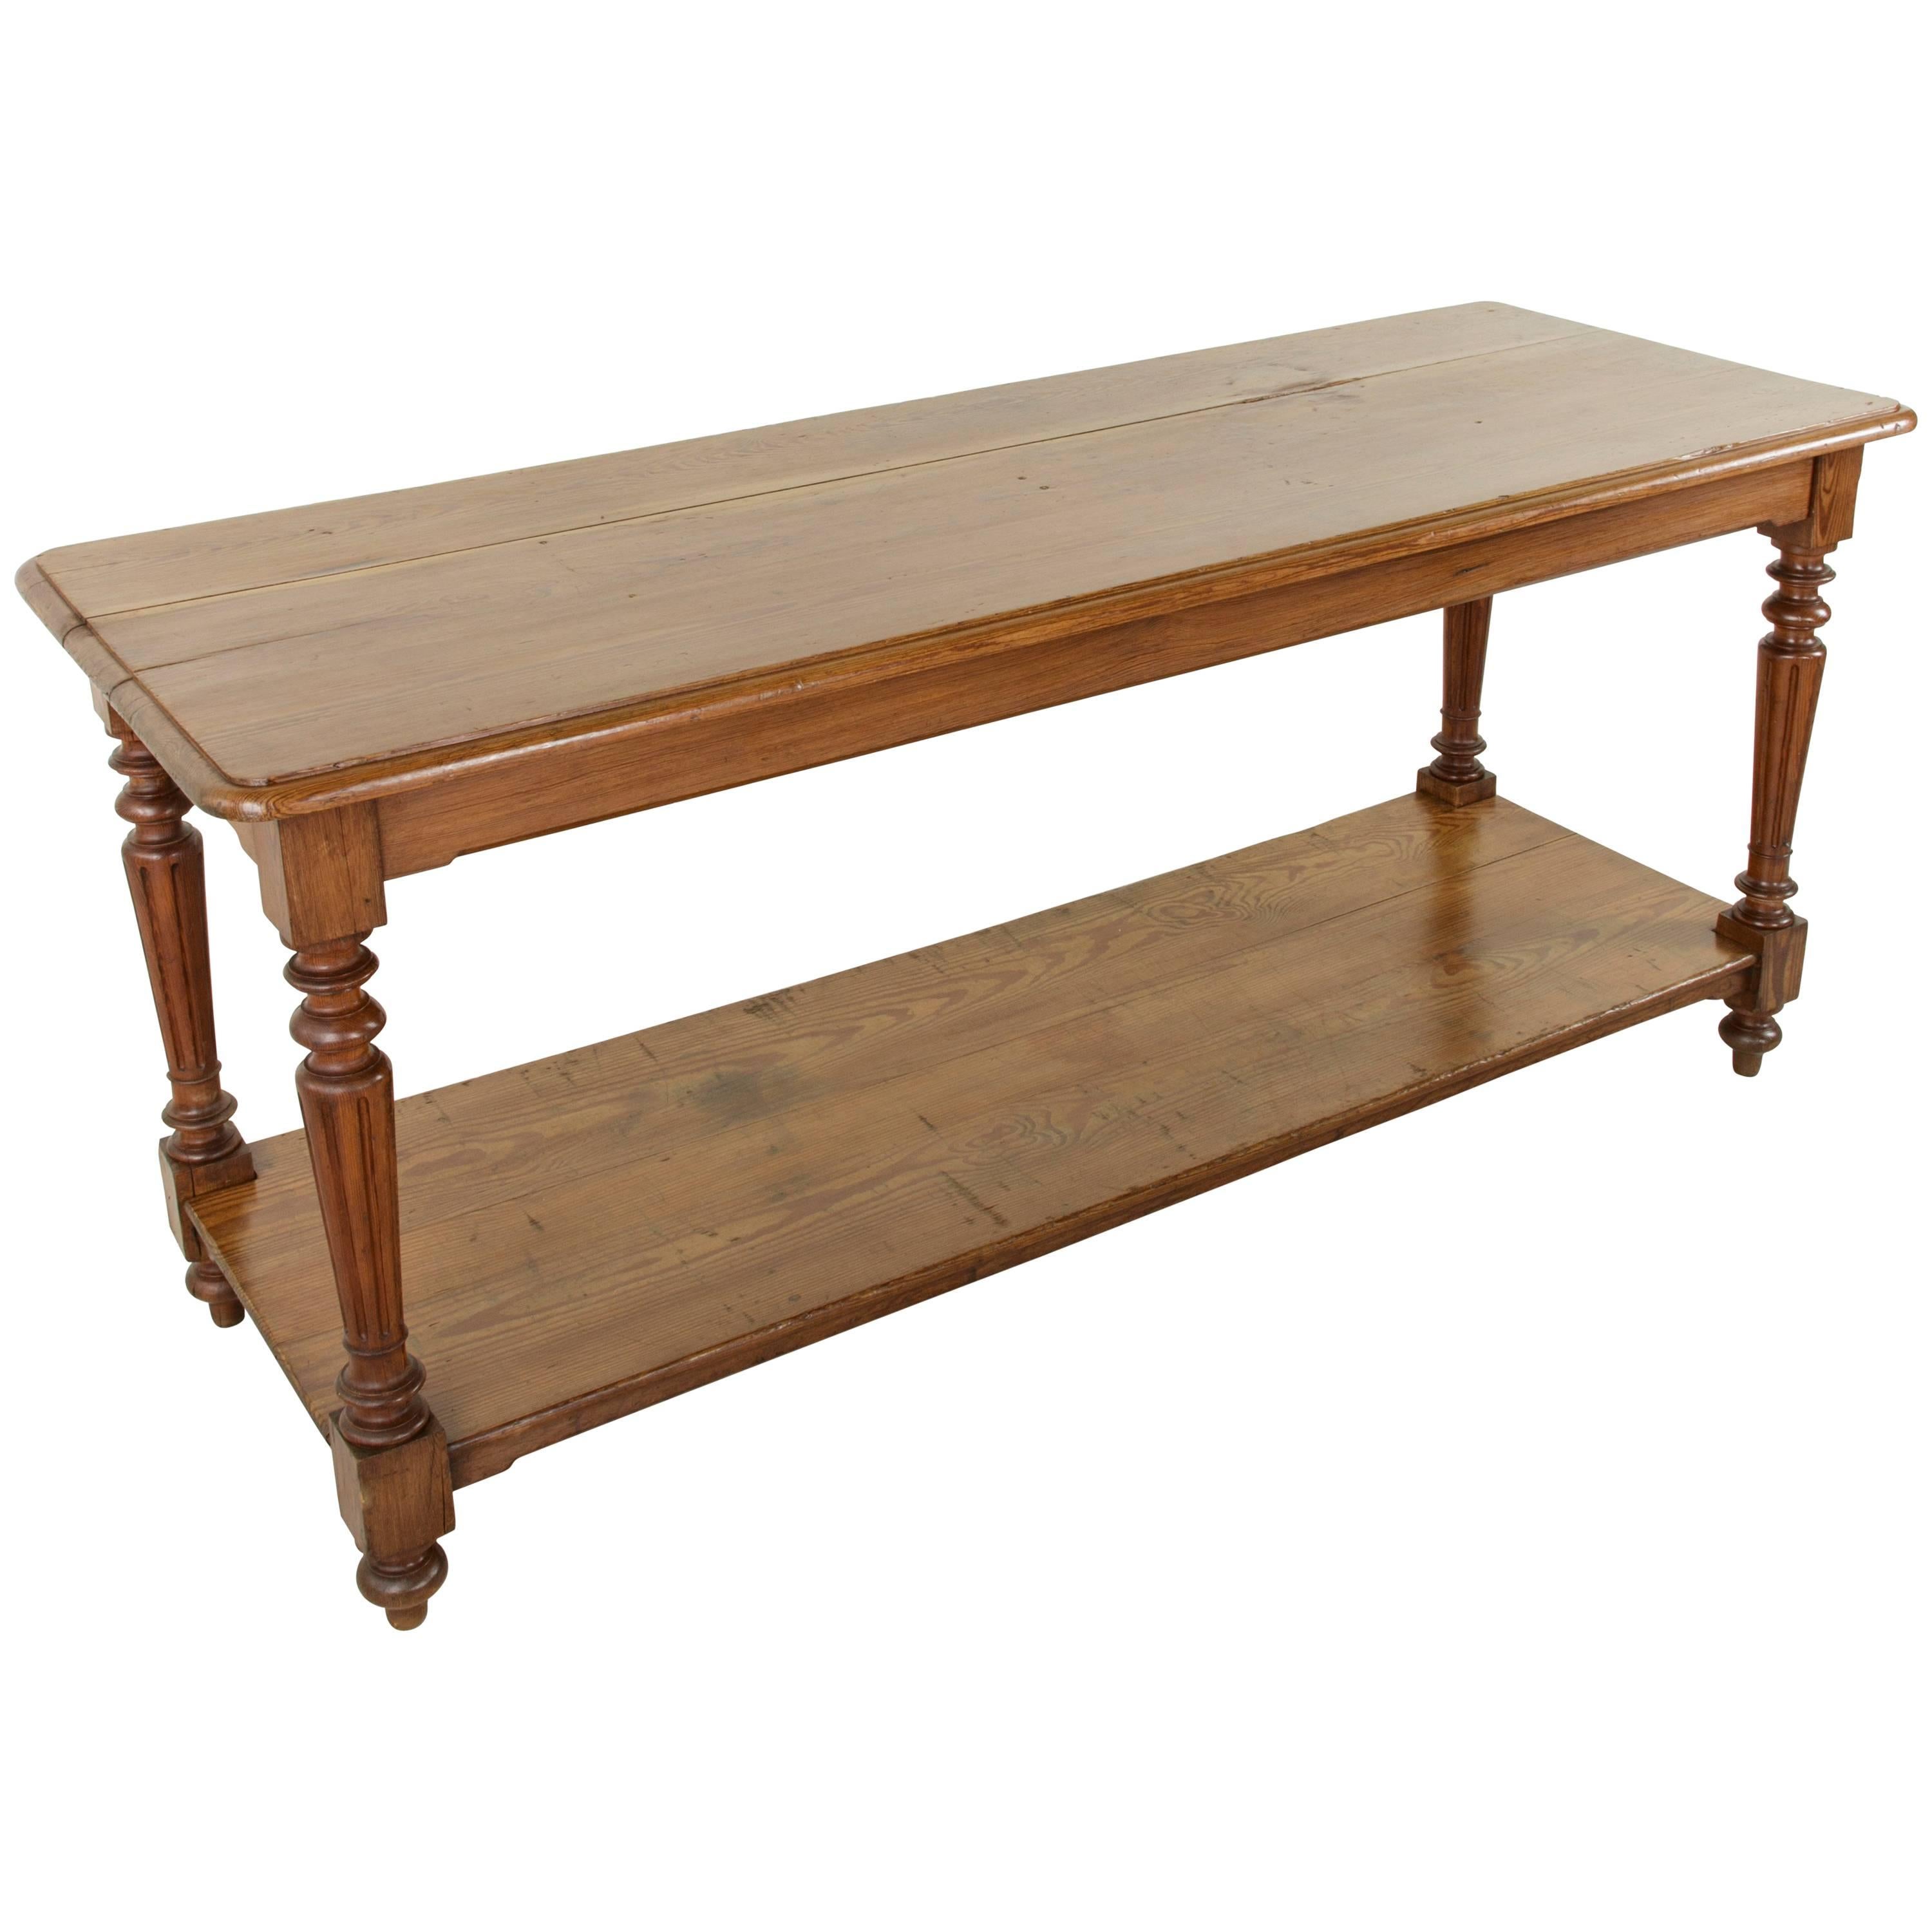 French Pitch Pine Draper's Table, Work Table, or Kitchen Island, circa 1900